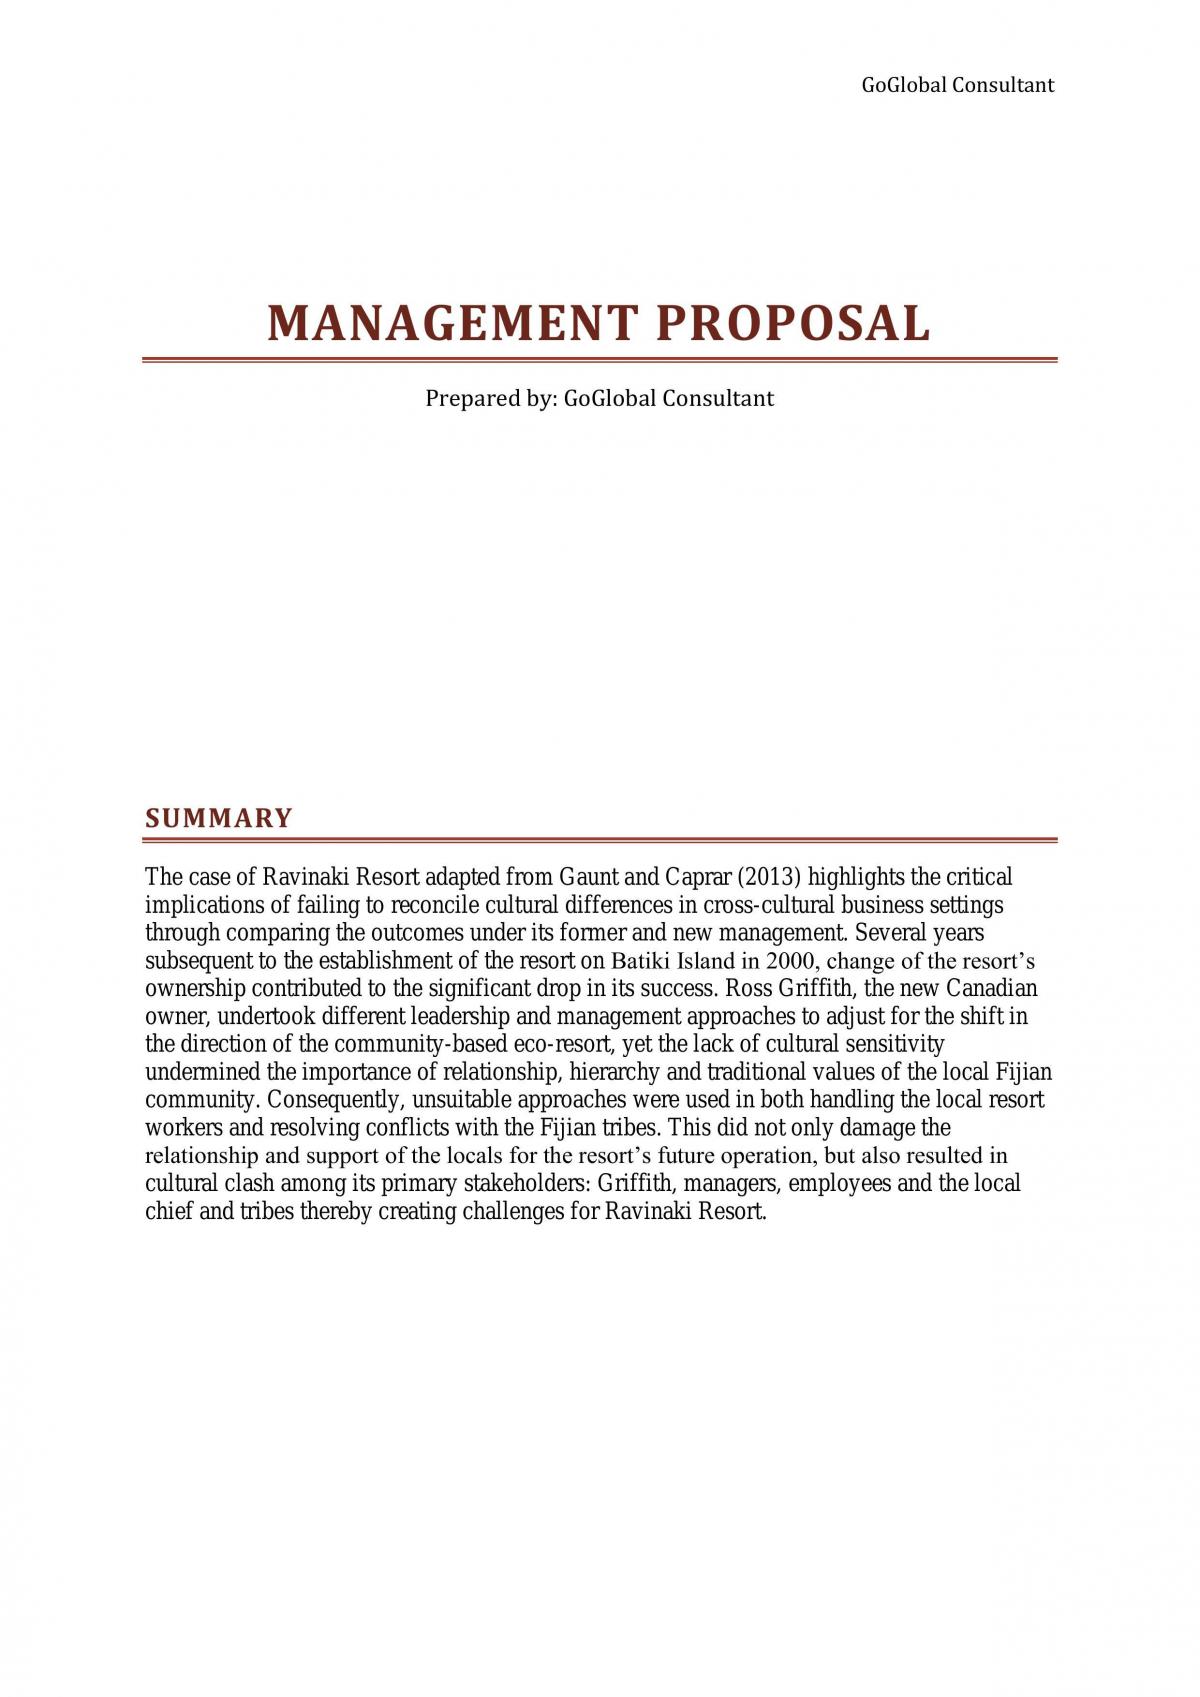 Managing Across Cultures - Management Proposal  - Page 1